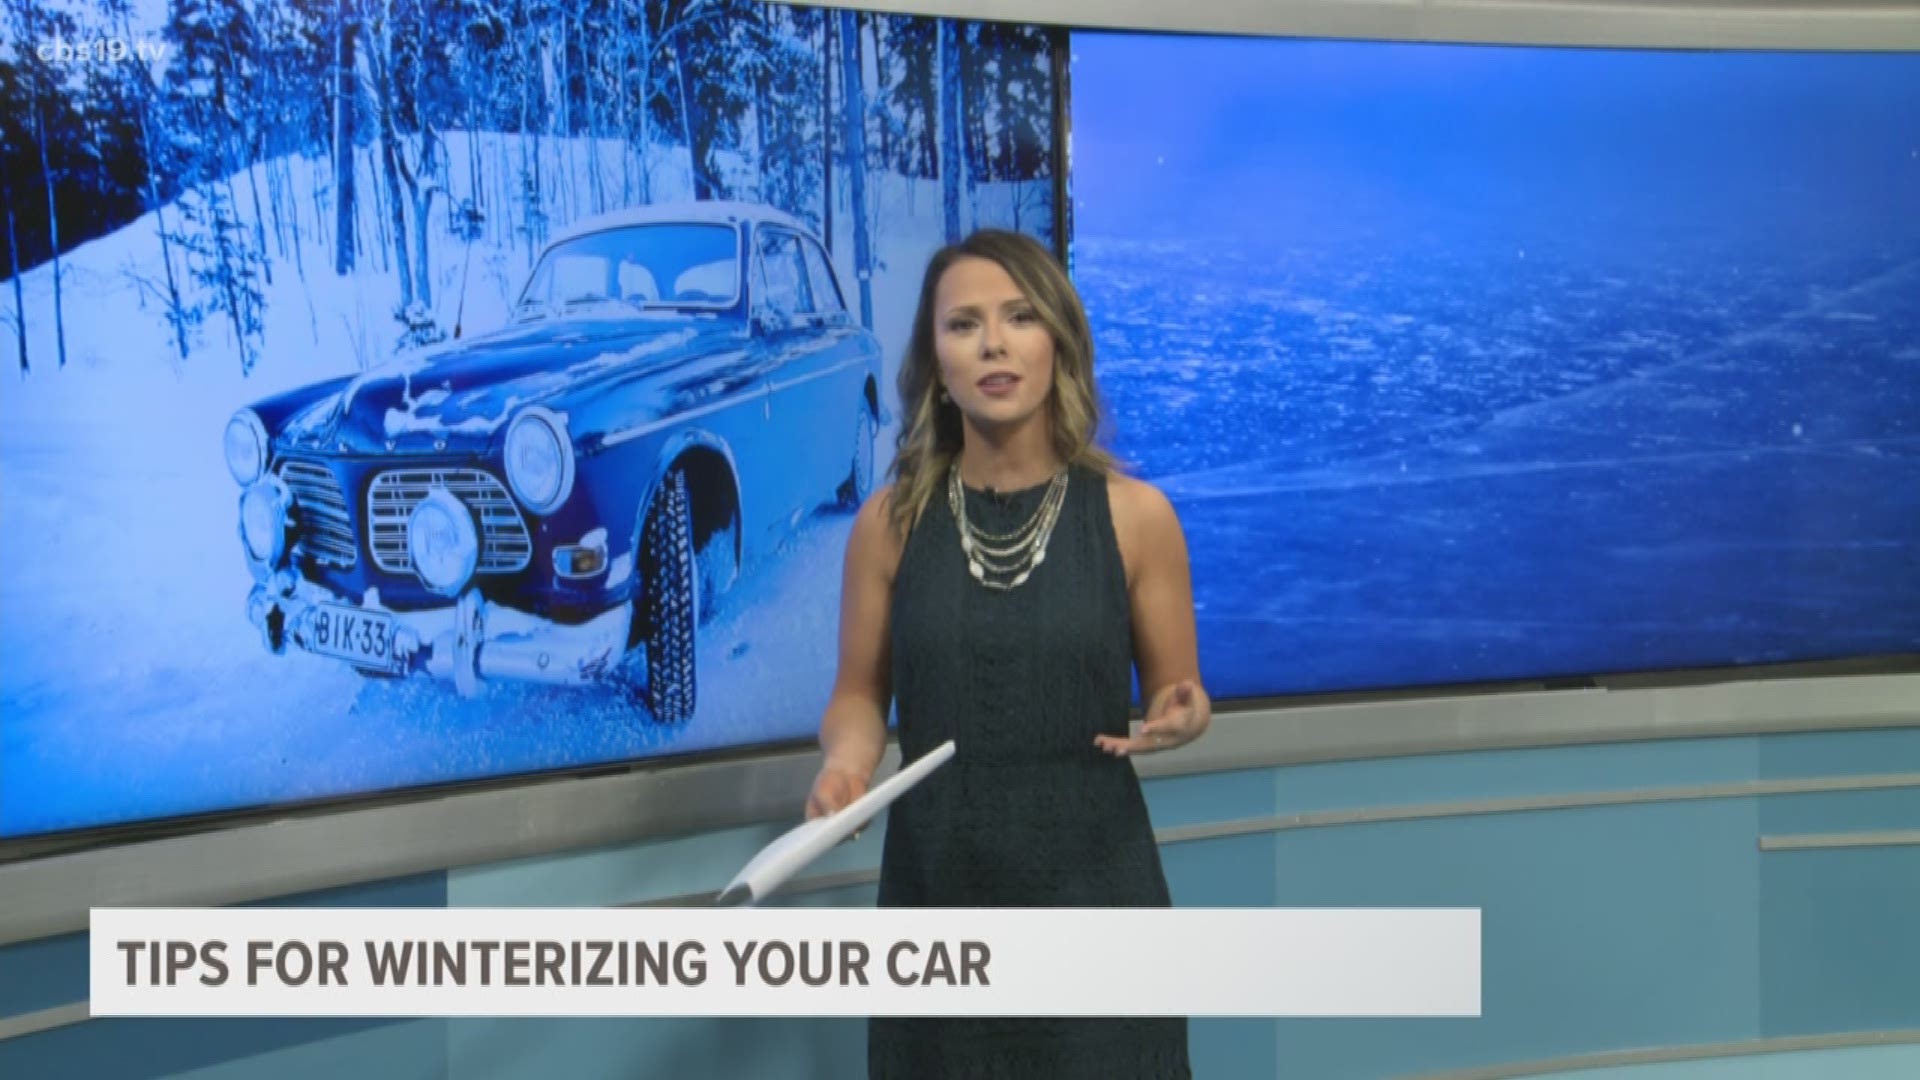 The Morning Loop's Lexie Hudson has tips to get your car winter ready.